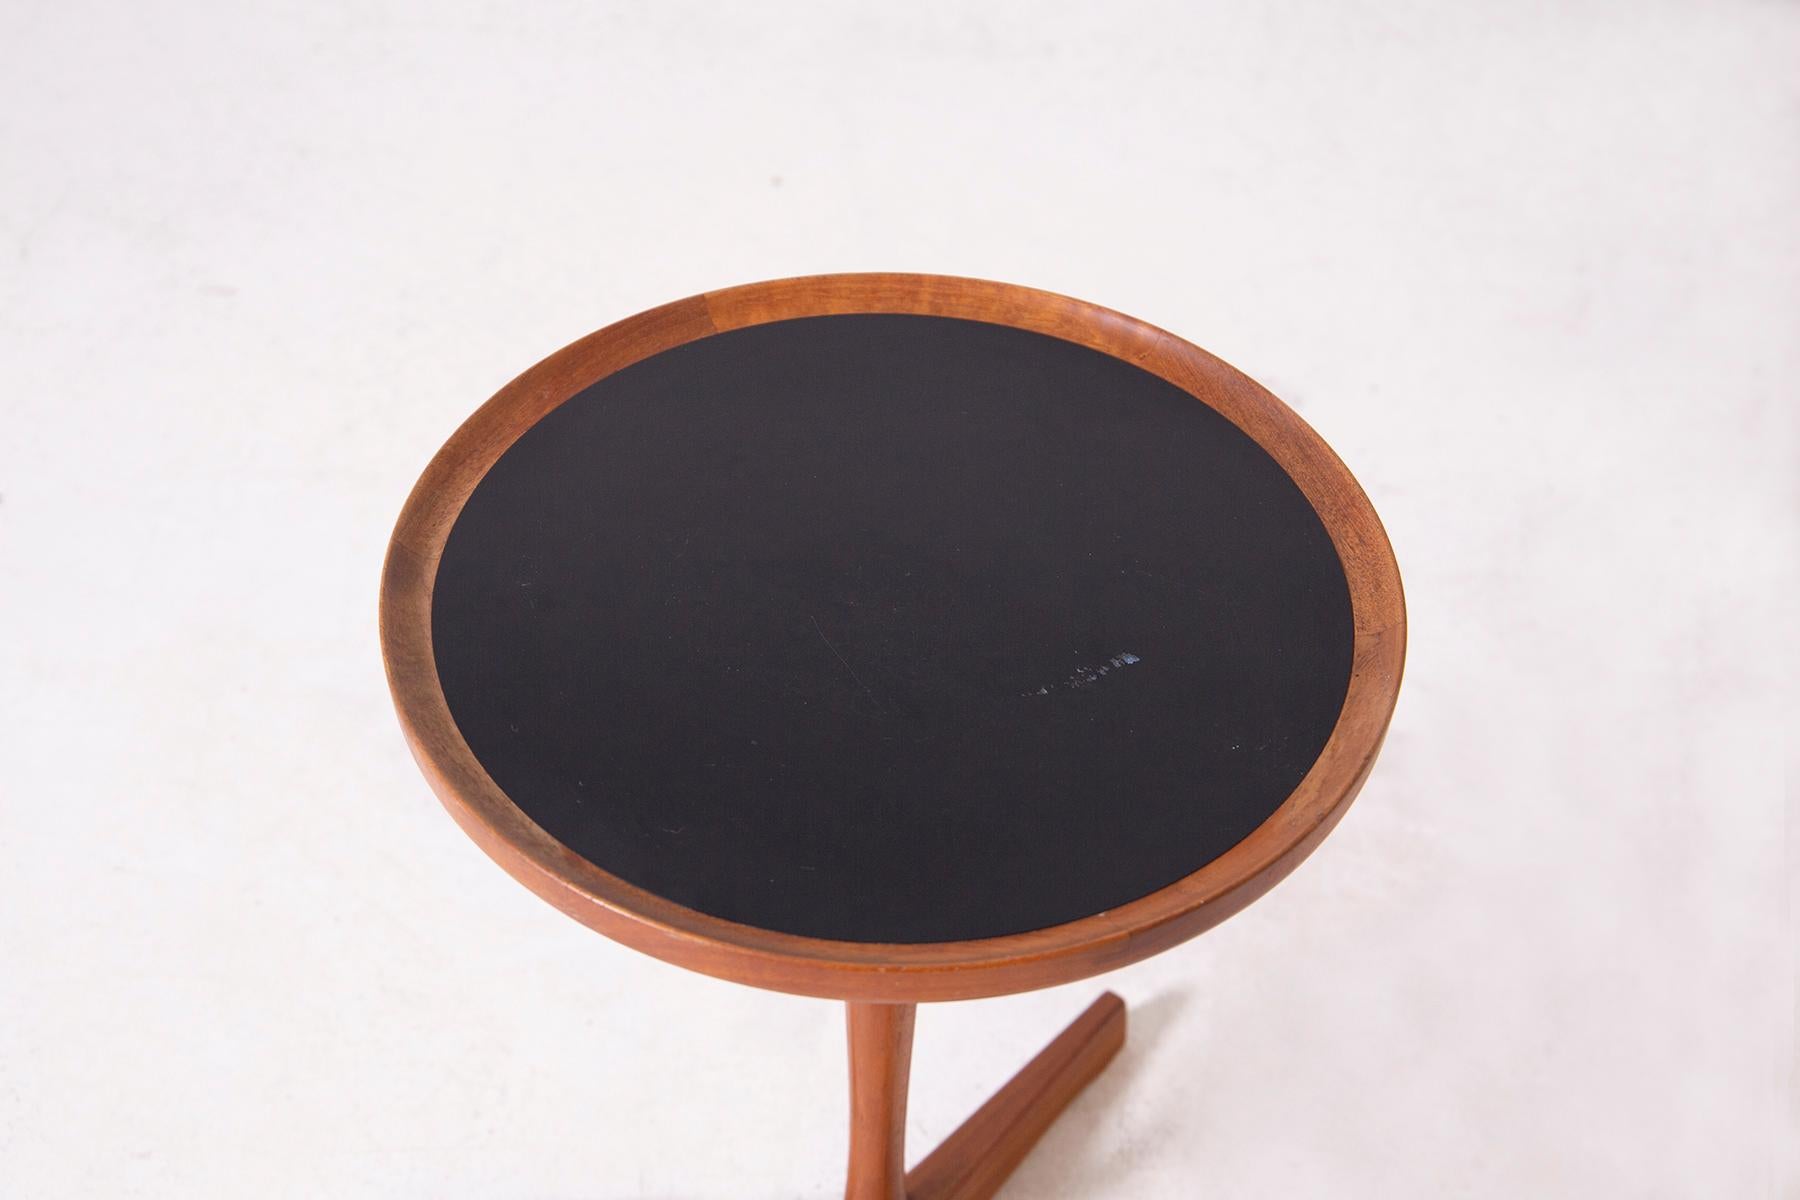 Small teak coffee table by Hans C. Andersen from the 1950s. The coffee table has a single pendant with three support feet, Teak tripod base frame with original black melamine top. The special feature of the small table is its beautiful wood joints.